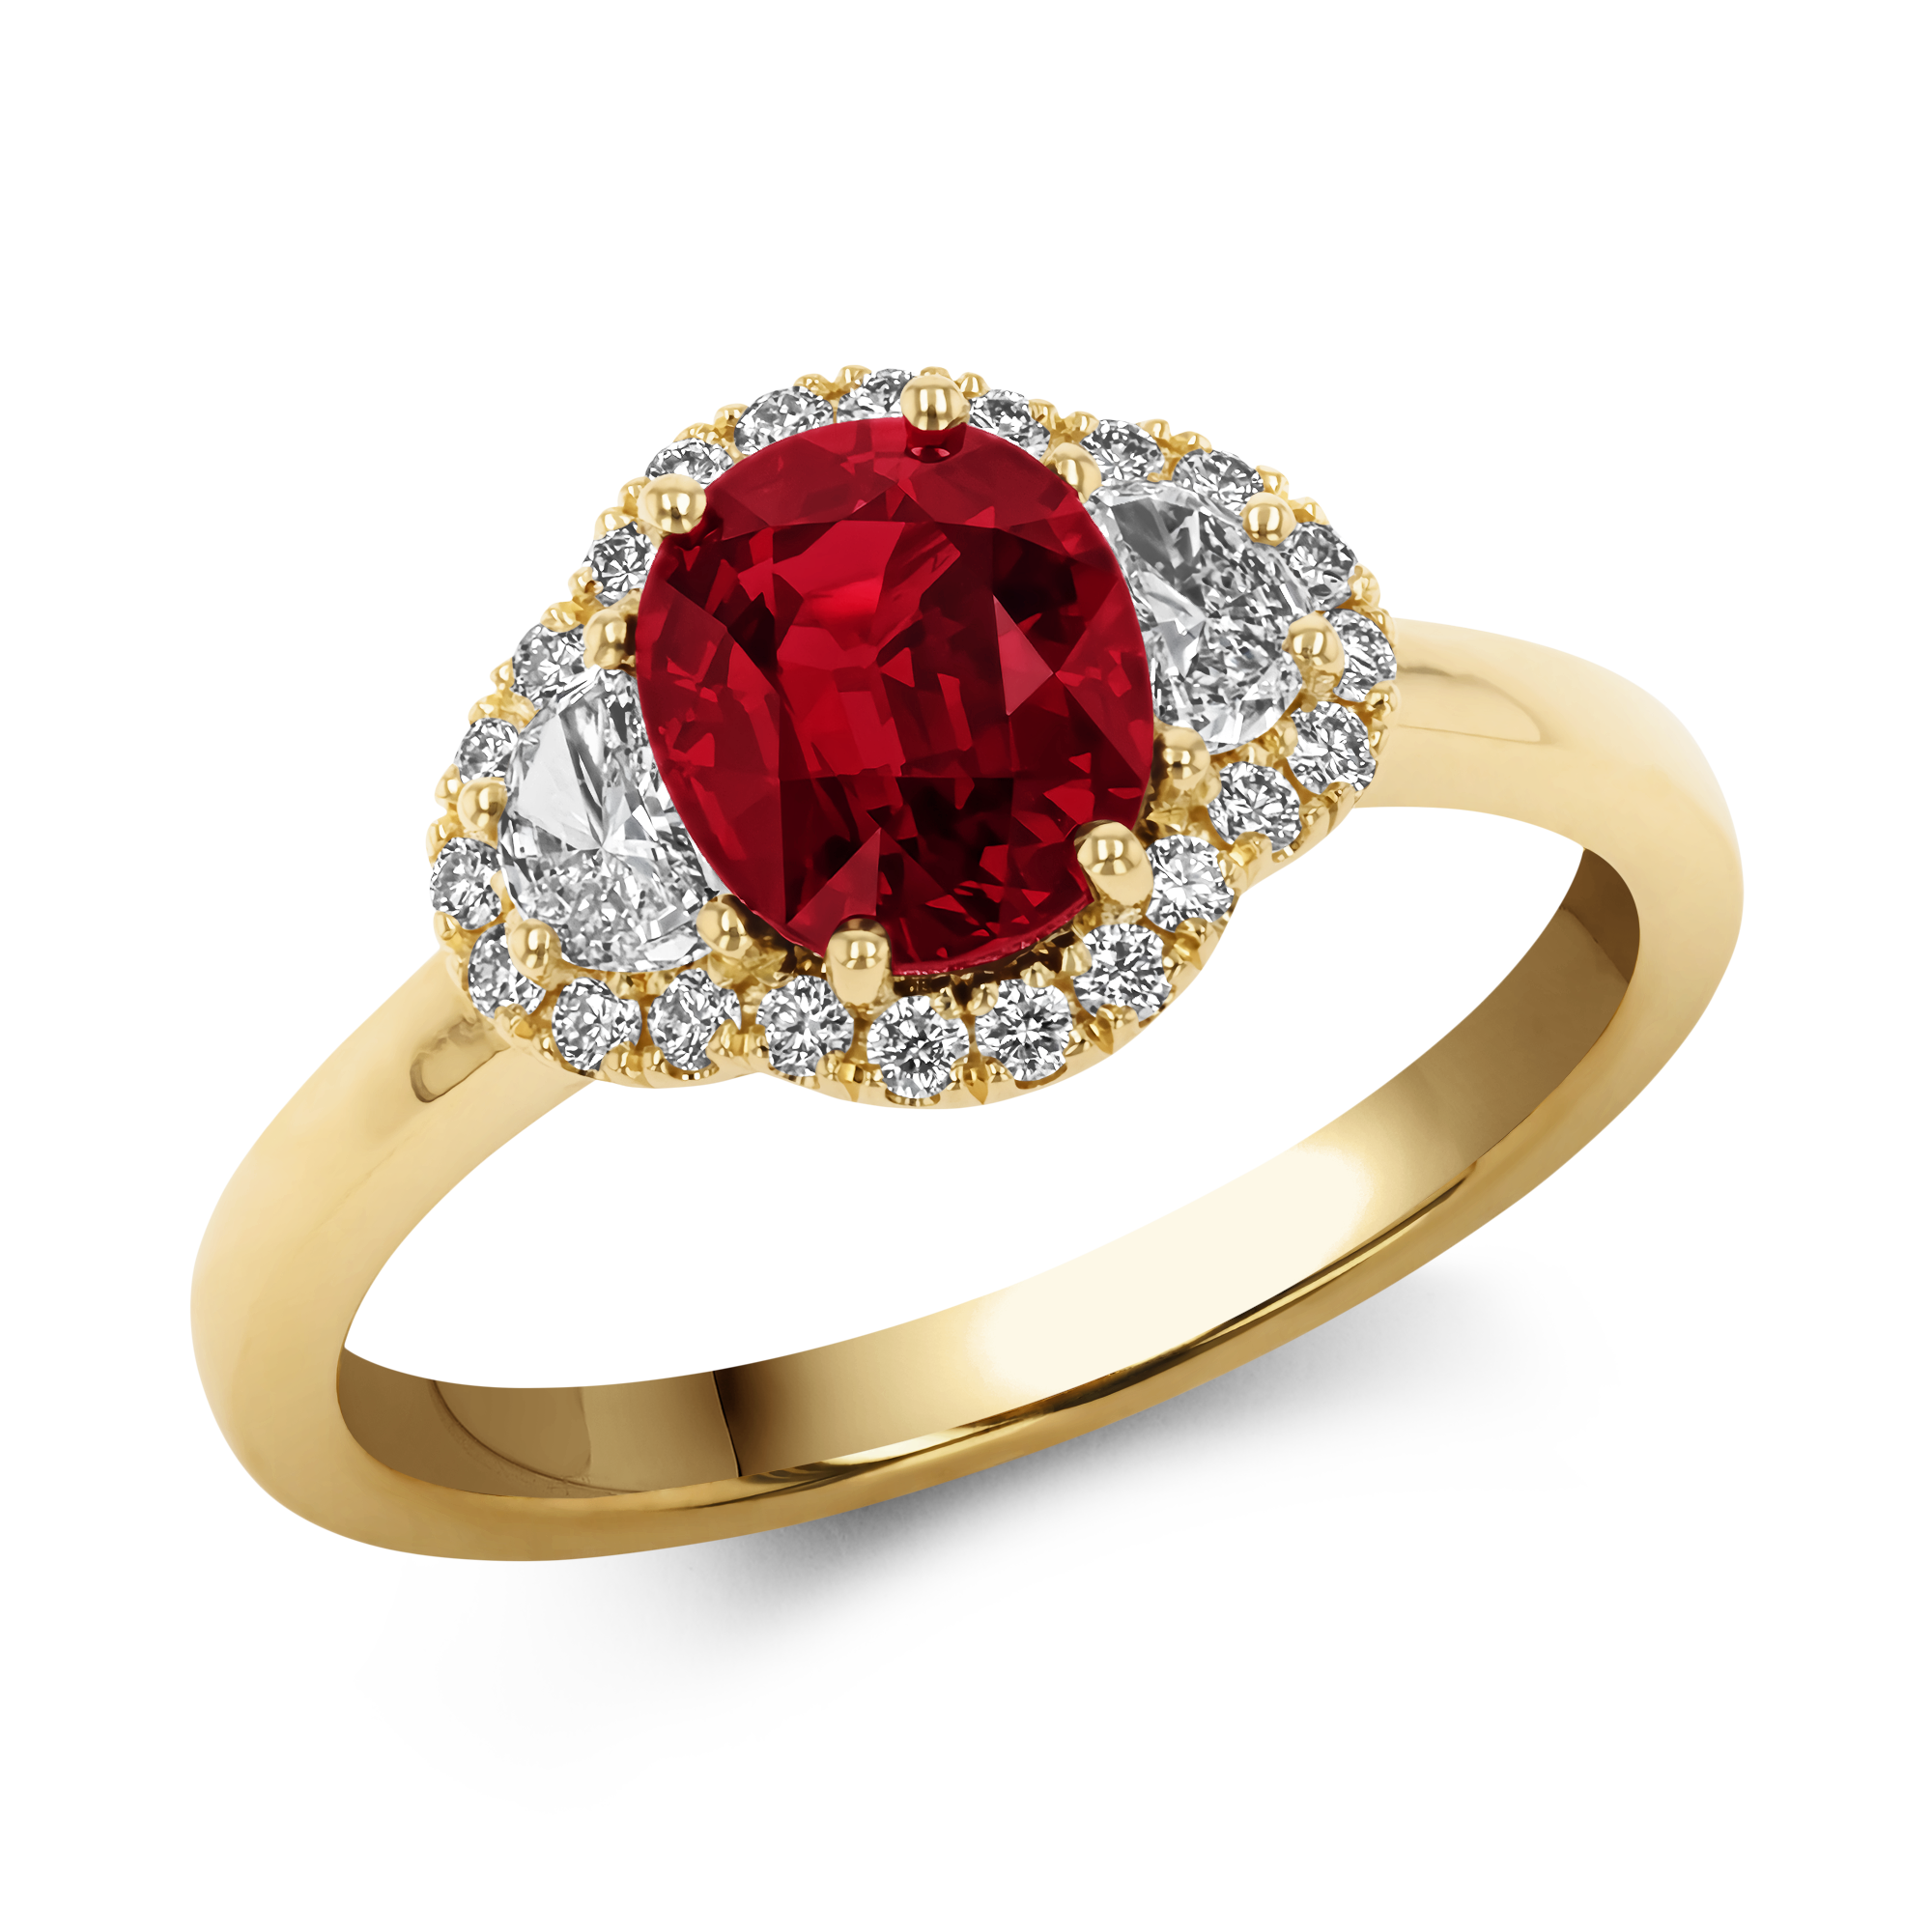 Mozambique 1.41ct Vivid Red Ruby and Diamond Cluster Ring Oval Cut, Rubover Set_1